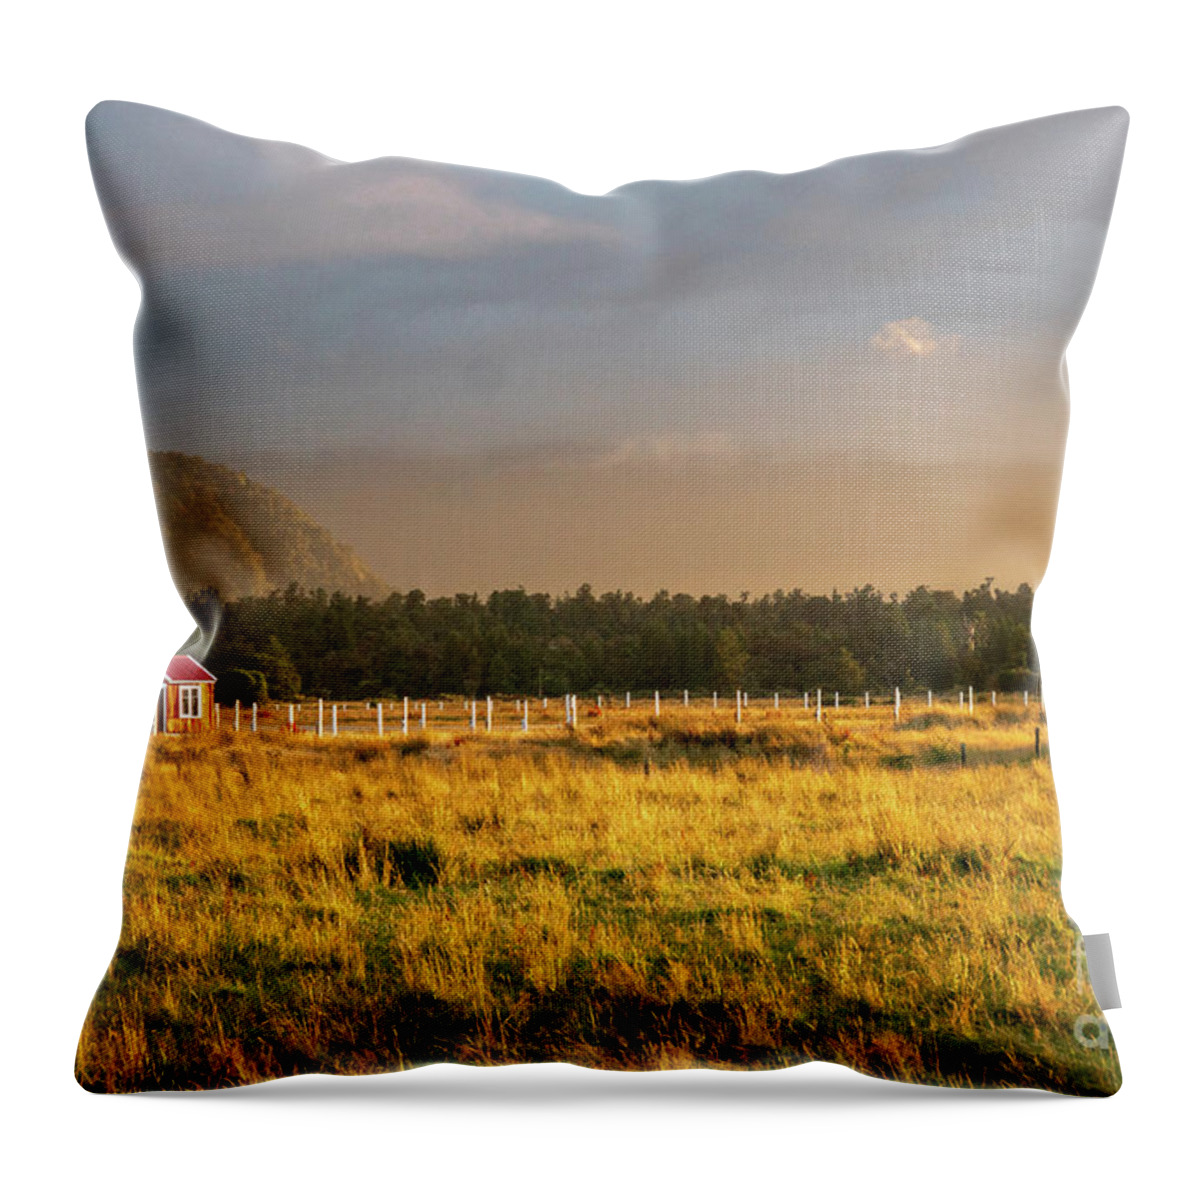 New Zealand Throw Pillow featuring the photograph #Farm #House on the Beach in #NewZealand by Max Blumenthal